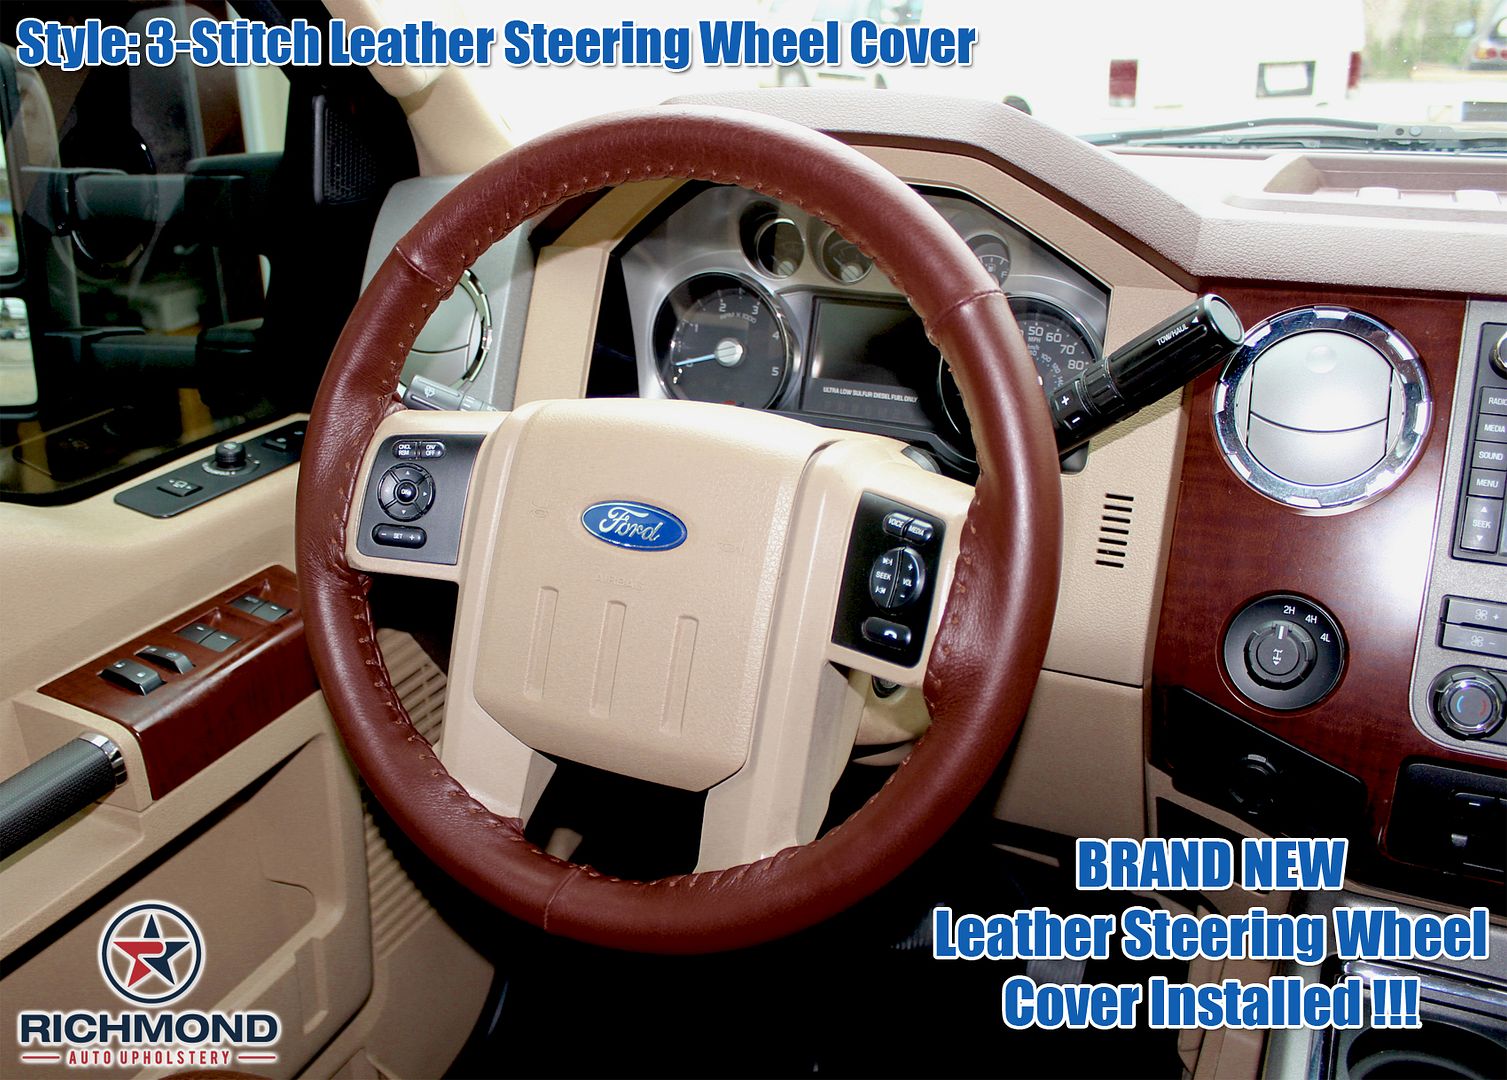  photo 2008-2009-Ford-F250-F350-F450-F550-King-Ranch-Leather-Steering-Wheel-Cover-9_zpsipfxsi3e.jpg